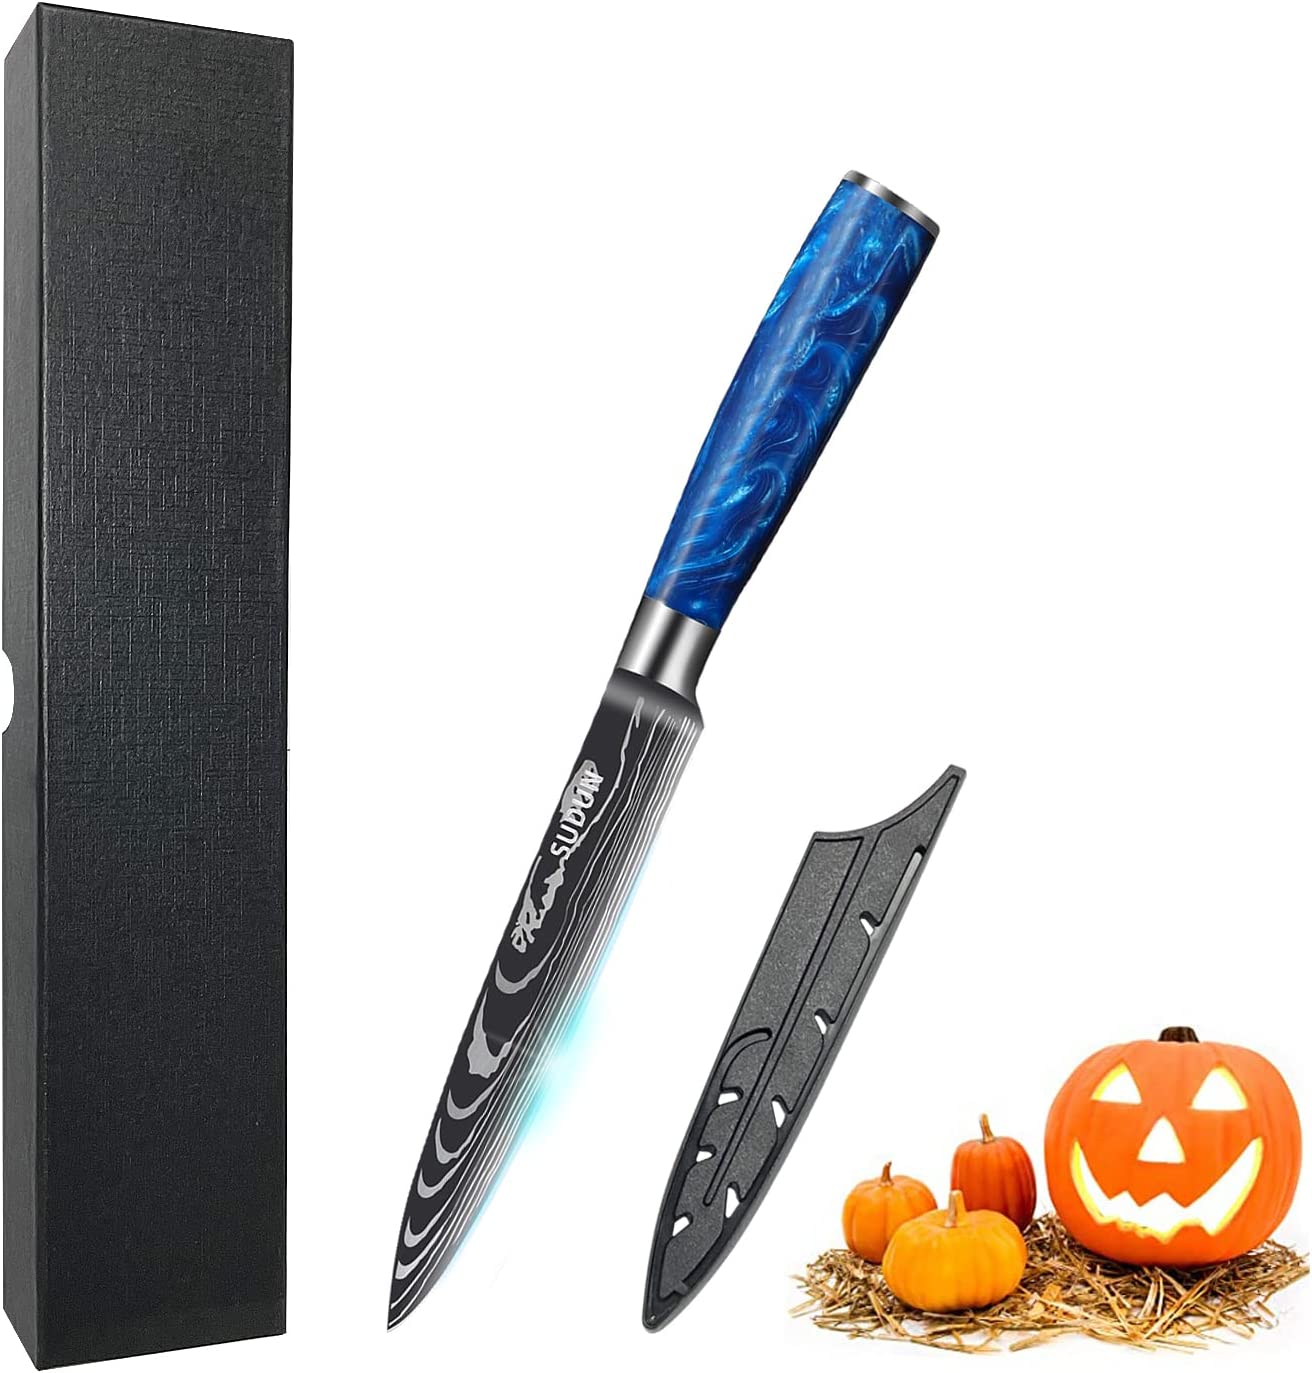 SUDUN 5 inch Versatile Kitchen Knife Utility Knife ， German Stainless Steel 7Cr17Mov, Razor Sharp Paring Knife ， Ergonomic Resin Handle with sheath and gift box ,for Home, Kitchen&Restaurant